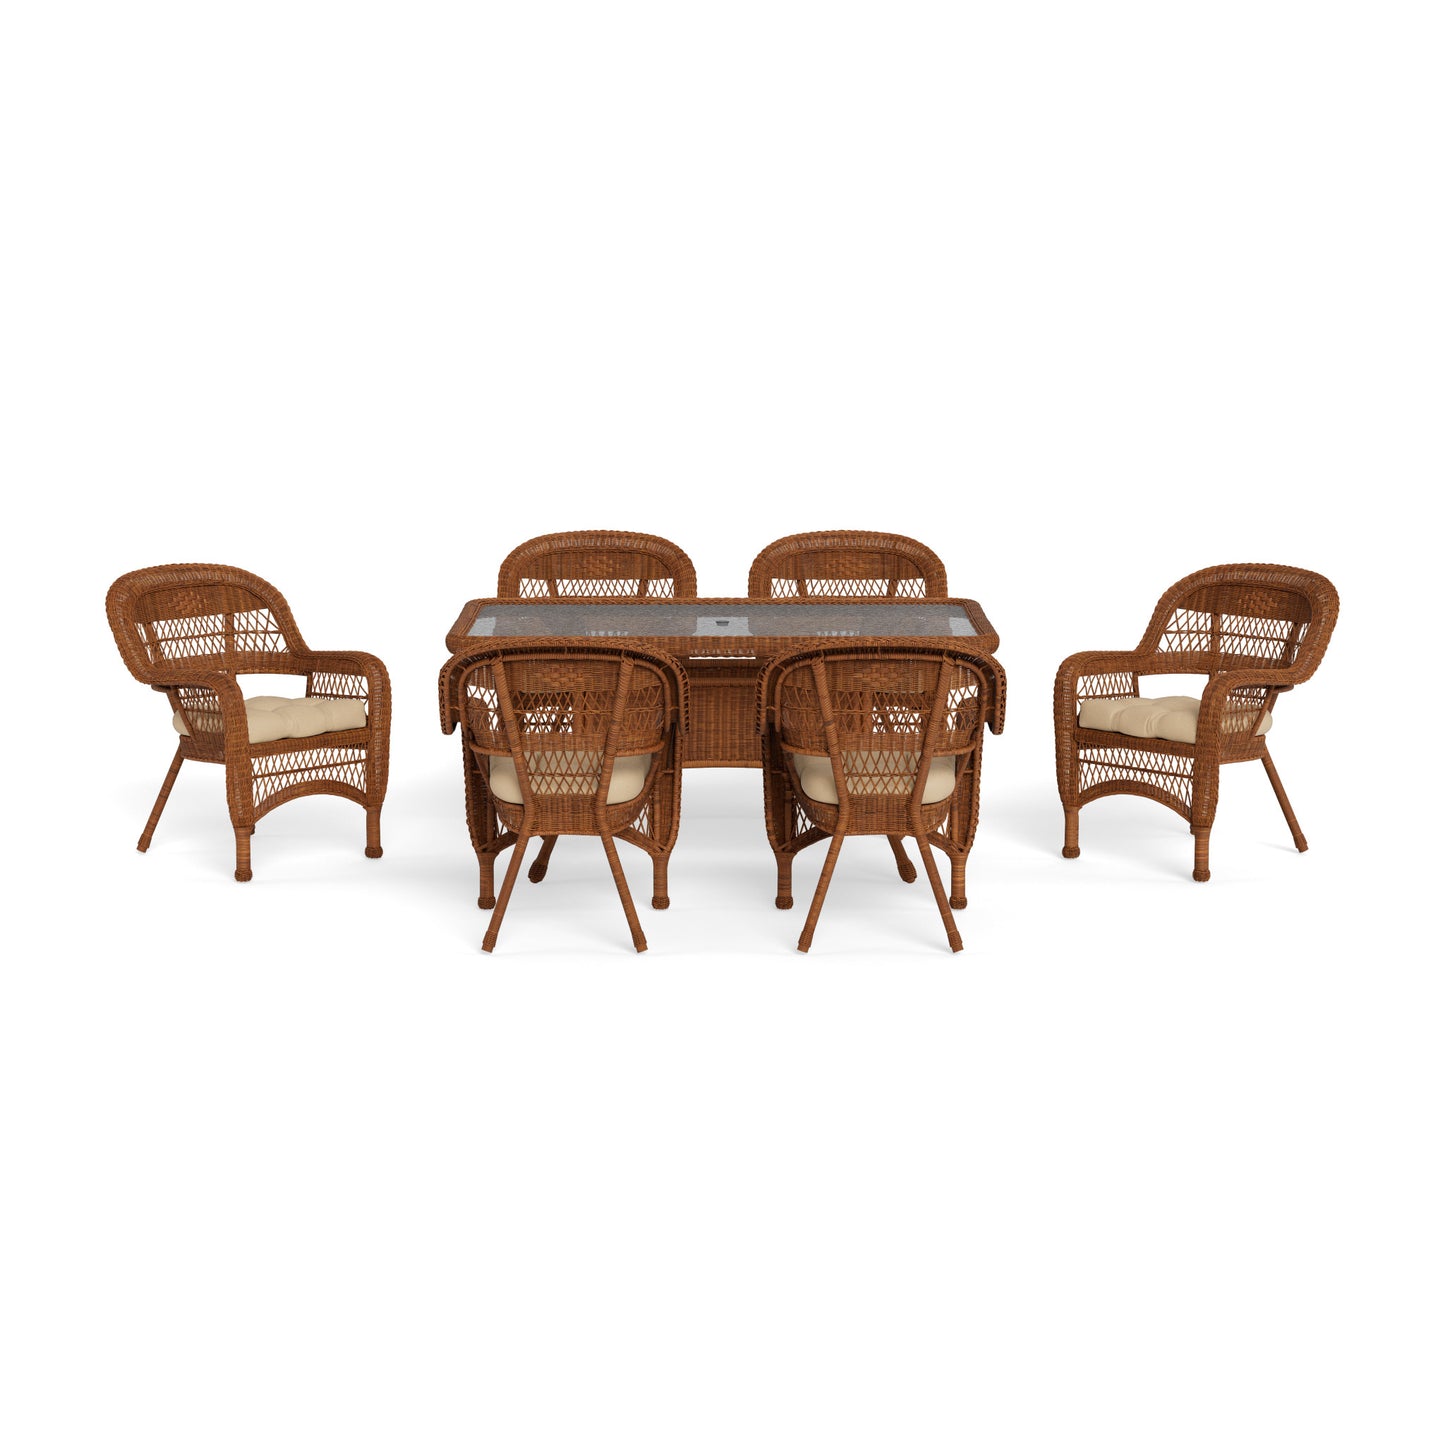 Portside 7Pc Dining Set  (6 chairs, 66" dining table) - Amber - Sand